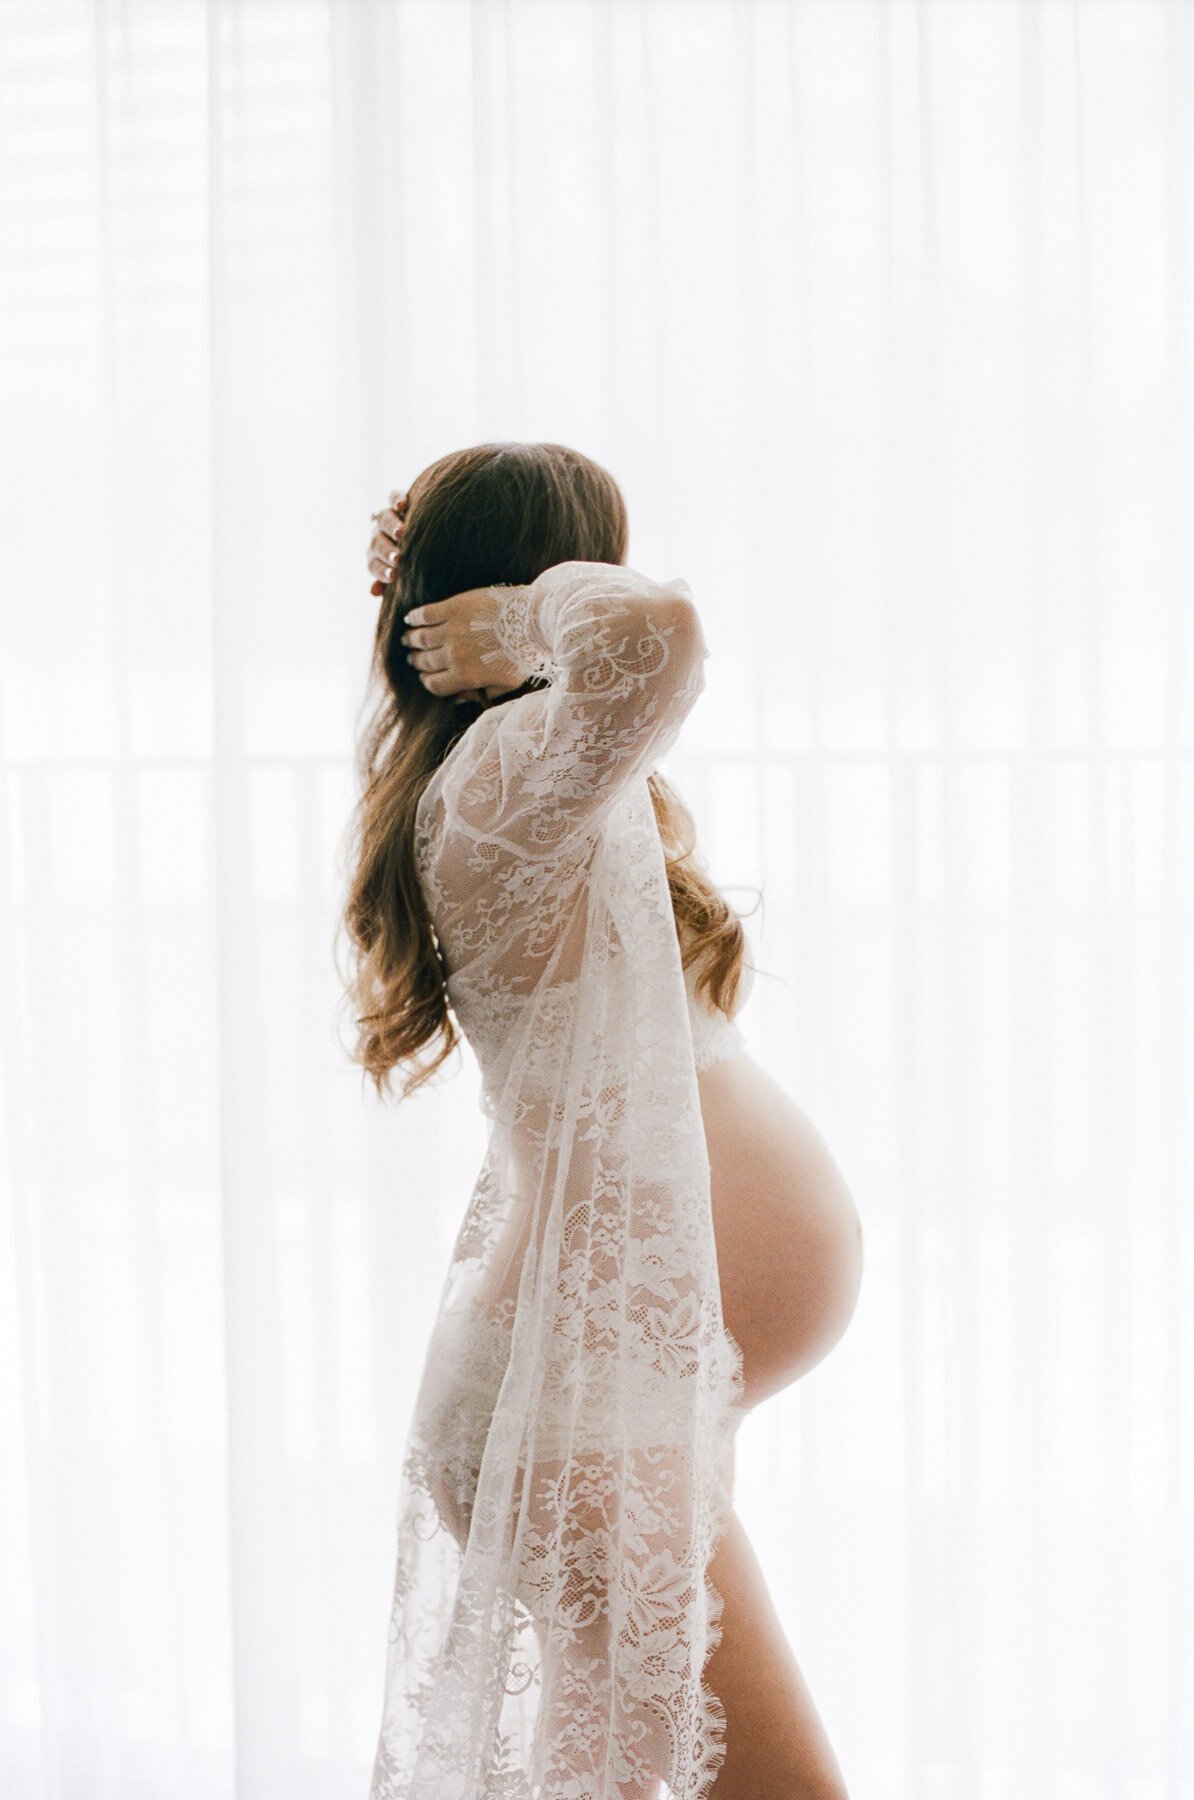 Ross Maternity by Michelle Lange Photography-3.jpg